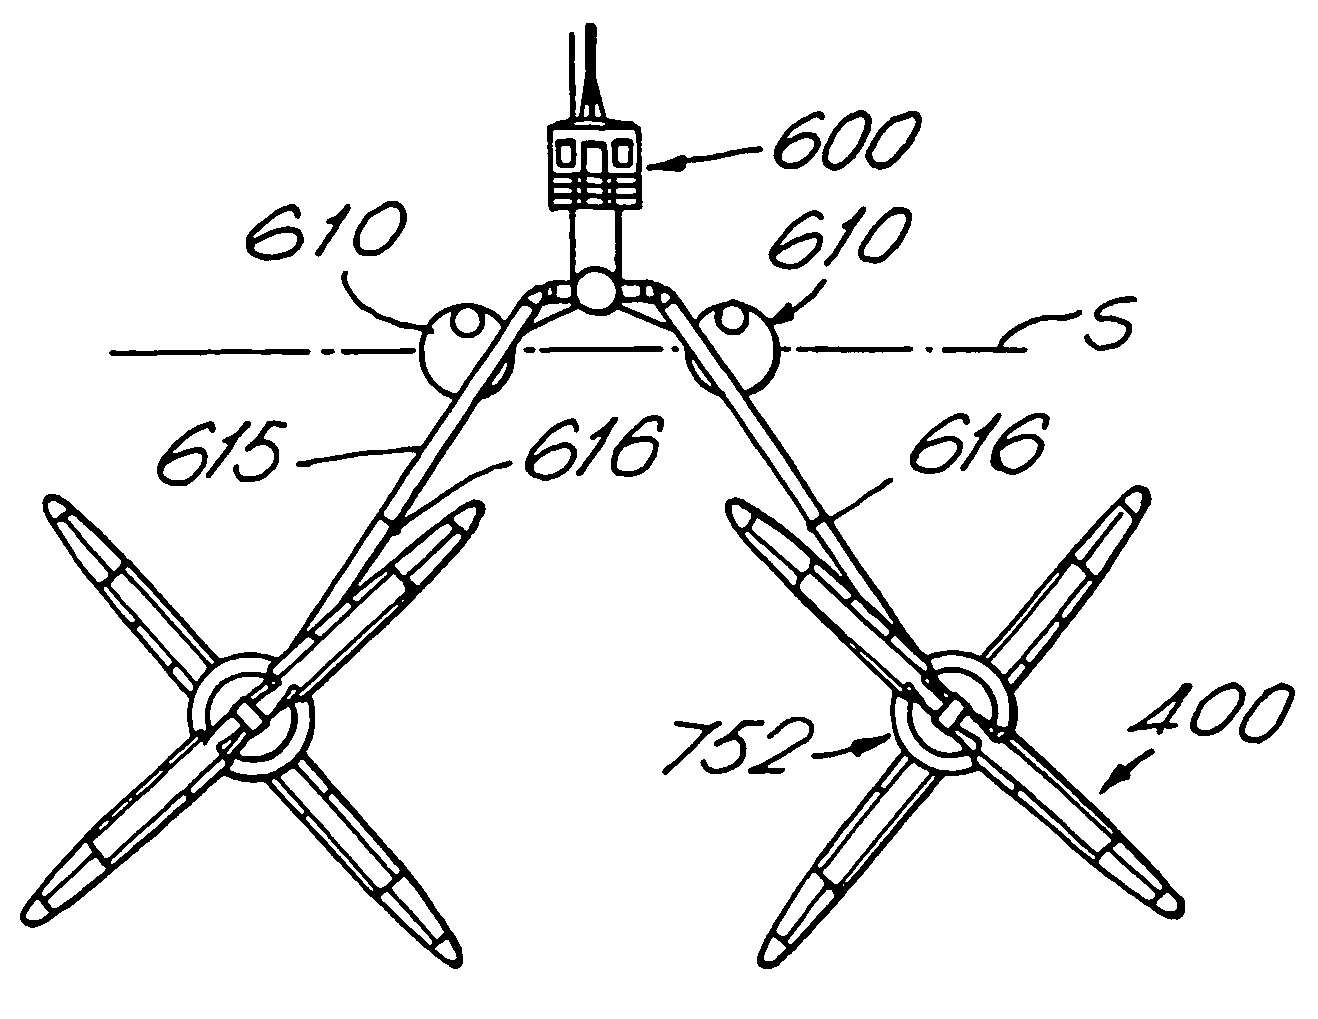 Plant, generator and propeller element for generating energy from watercurrents